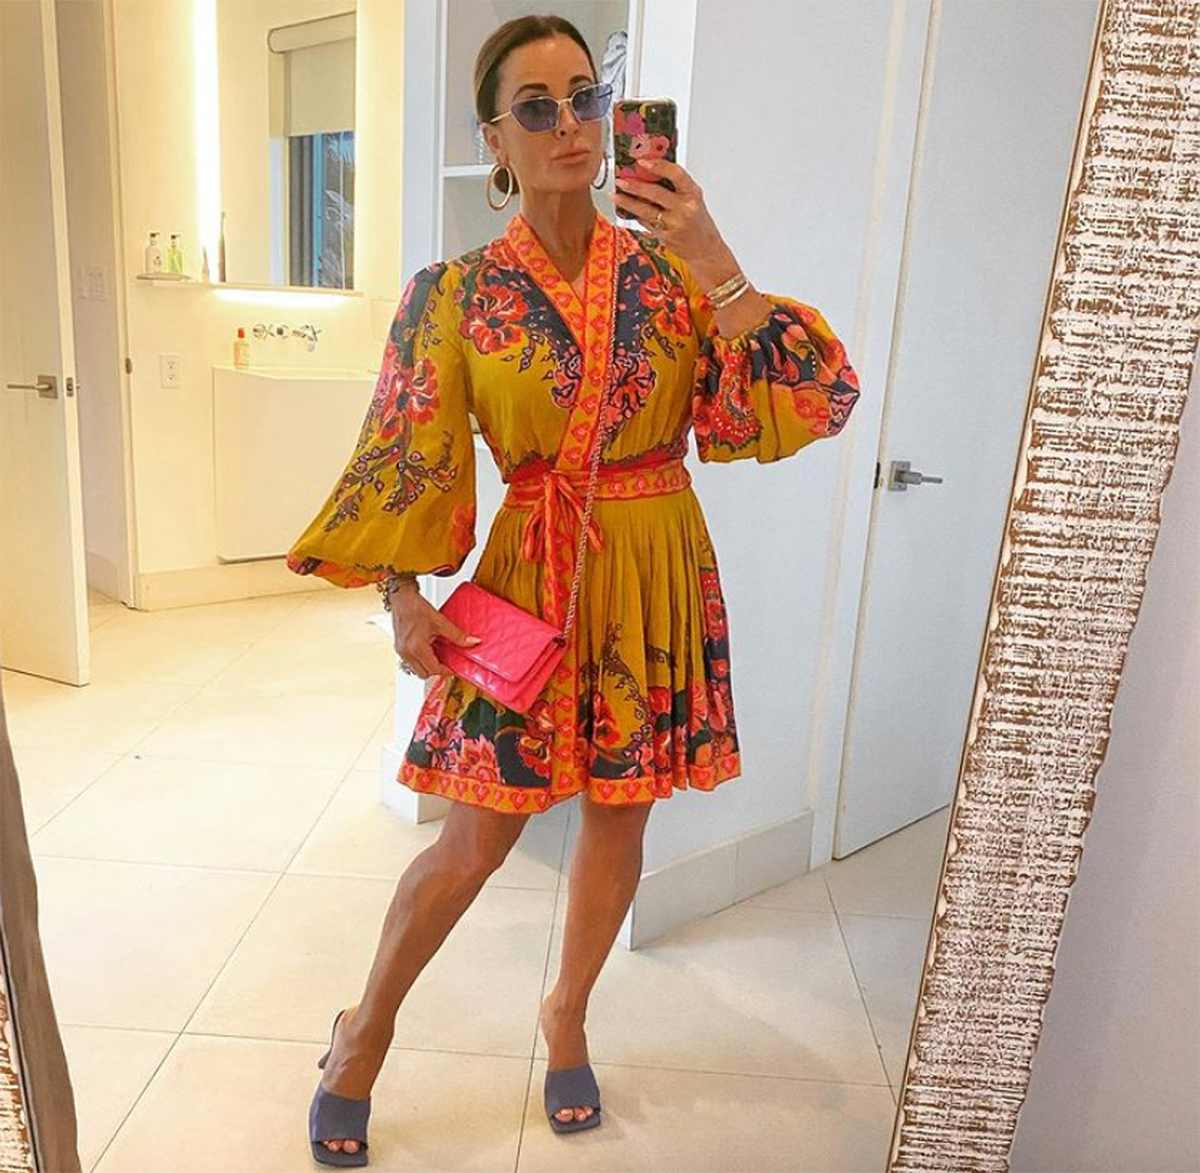 Kyle Richards doesn't share Chanel bags with children